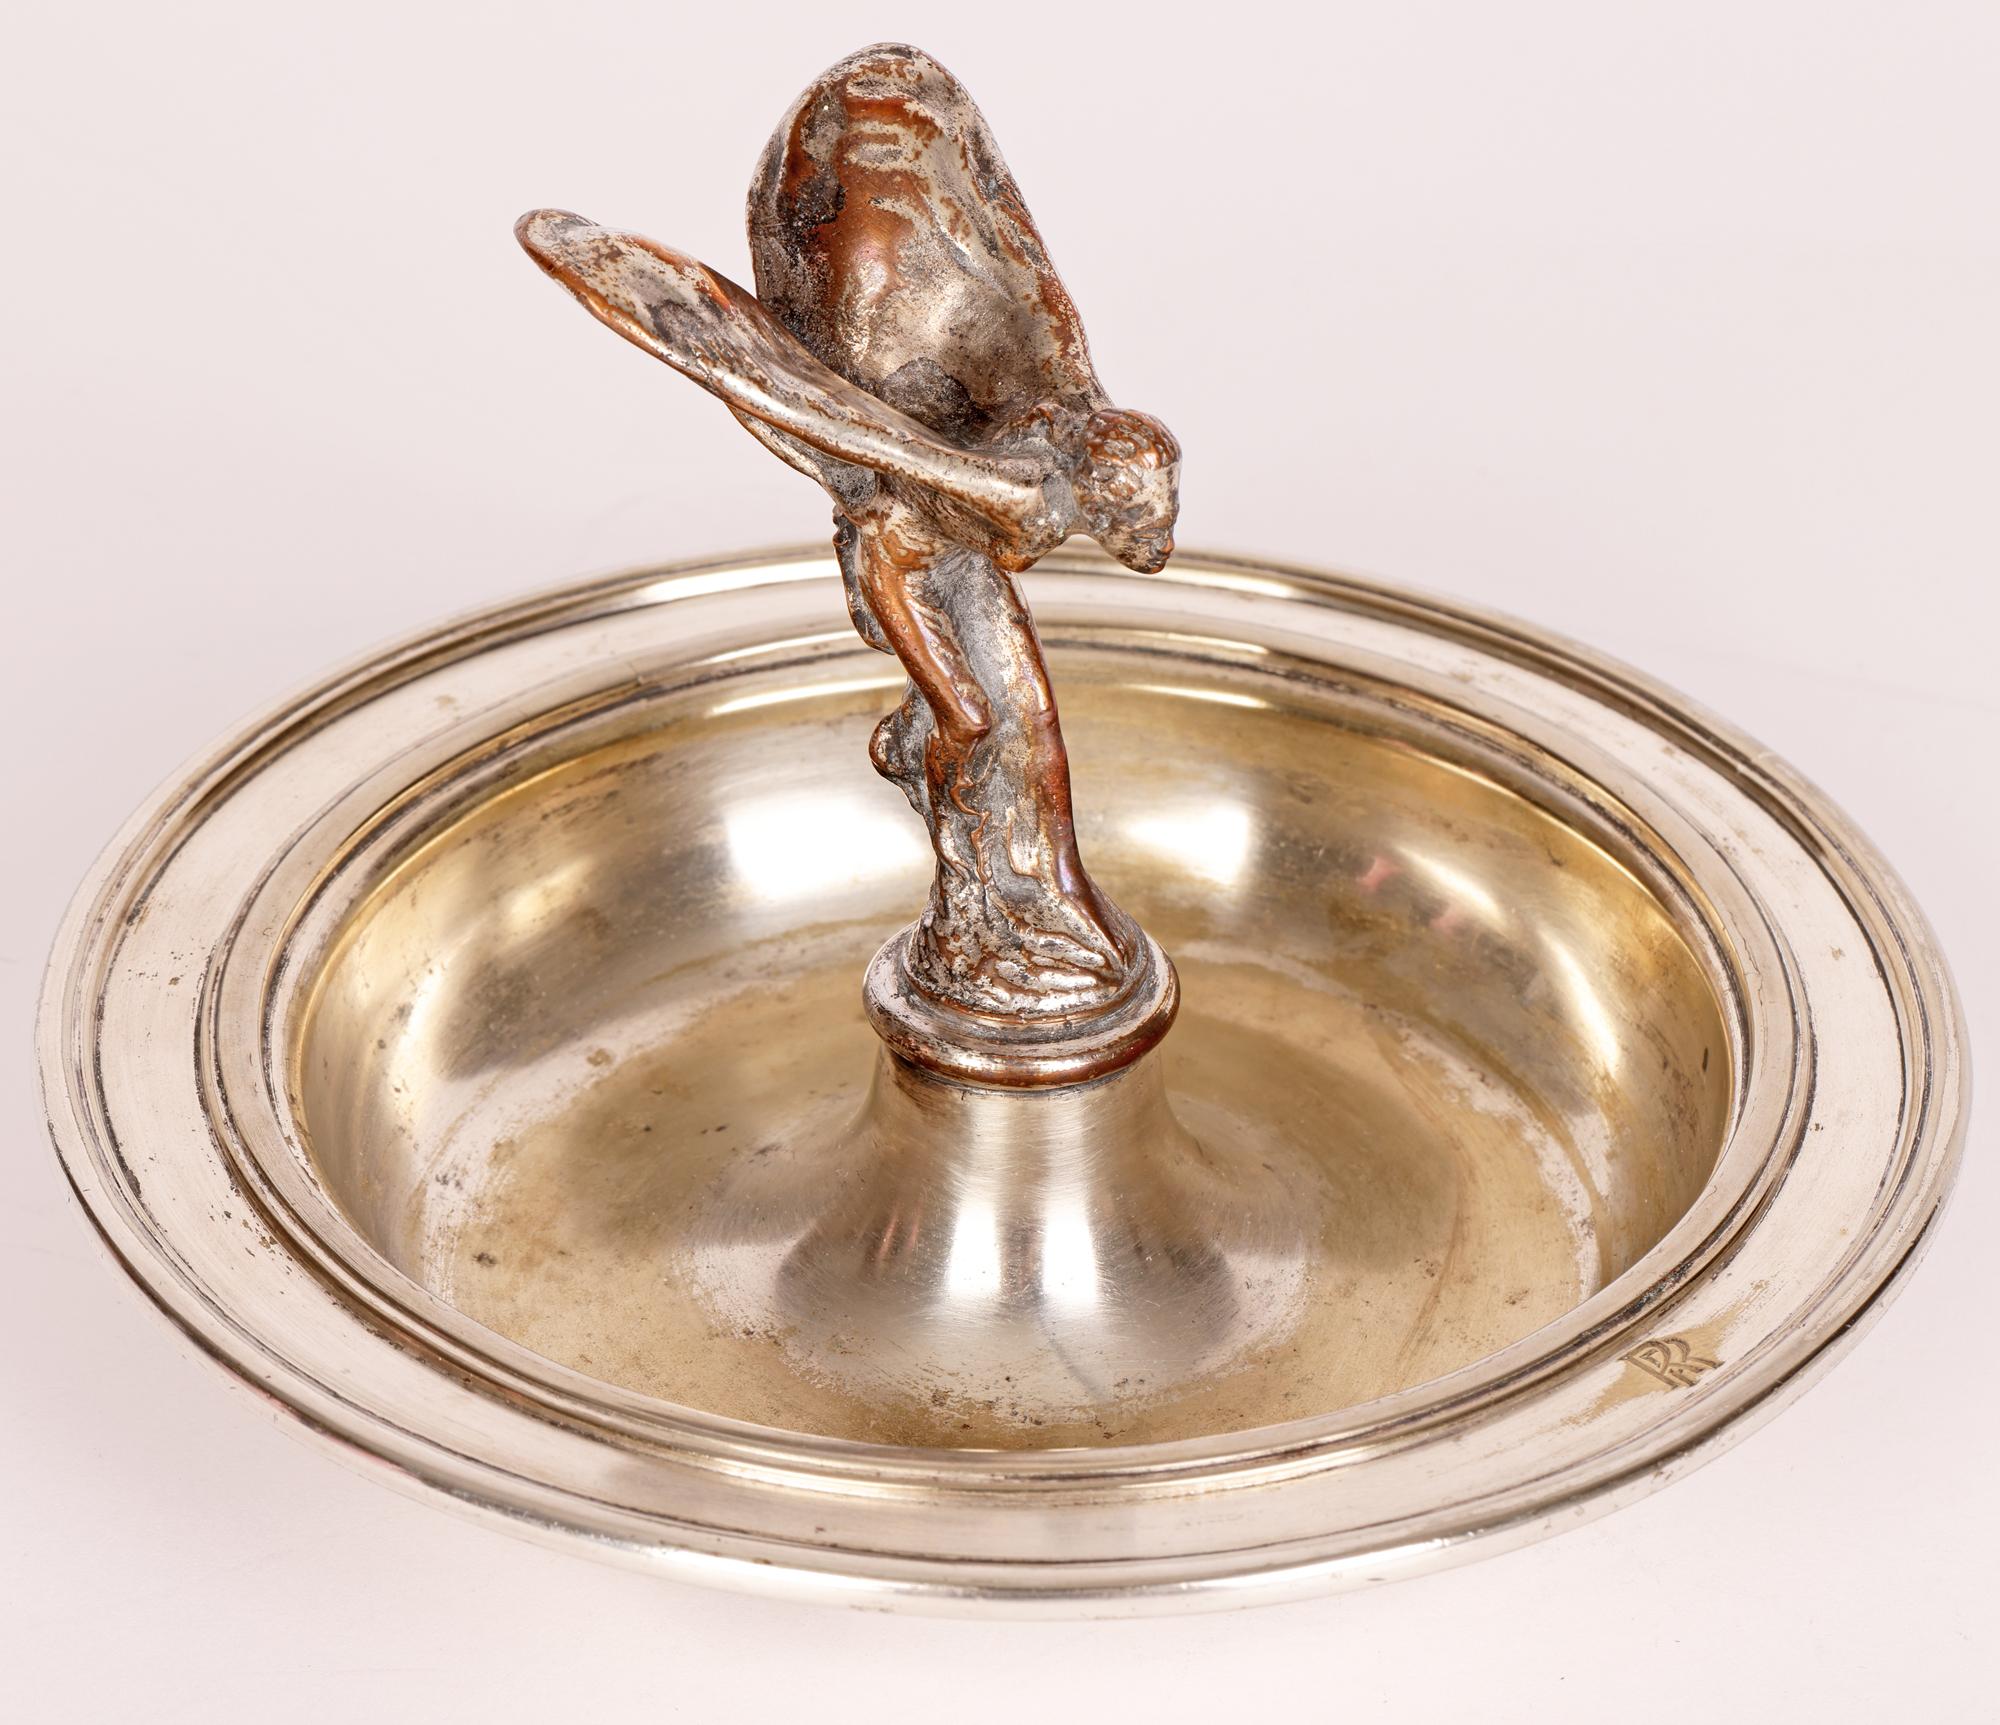 Early 20th Century Goldsmiths & Silversmiths Co Rolls Royce Spirit of Ecstasy Silver Plated Dish